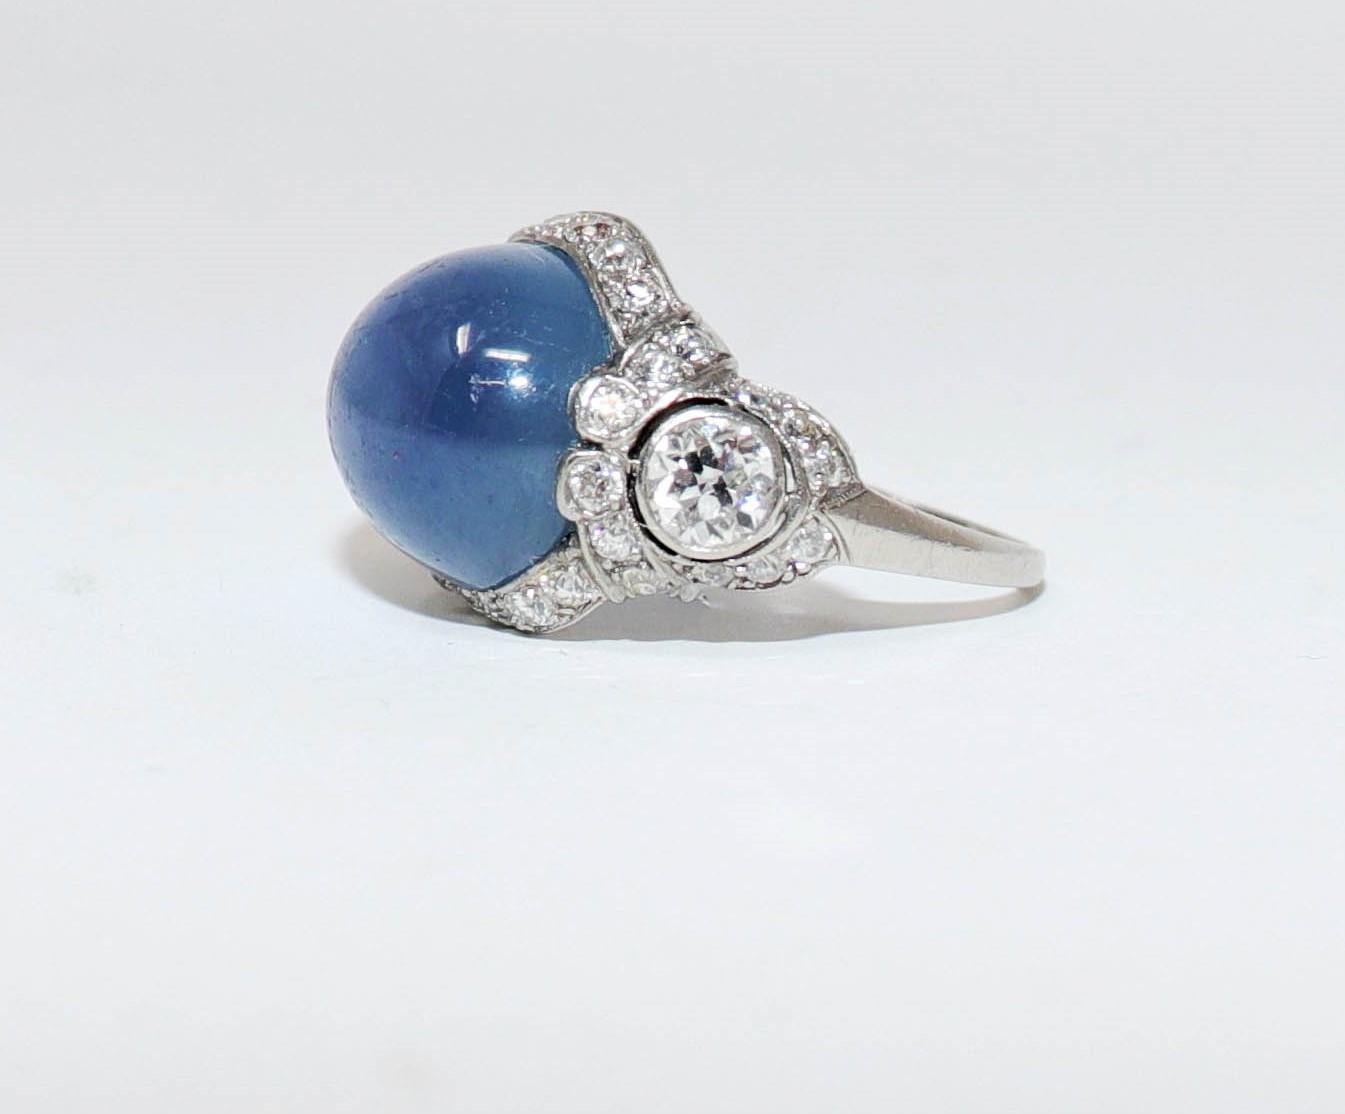 Ring size: 6

This rare star sapphire cocktail ring is an absolute showstopper. It features a stunning, high polished blueish-purple oval cabochon stone, surrounded by a sparkling halo of icy white diamonds. This magical stone shimmers beautifully